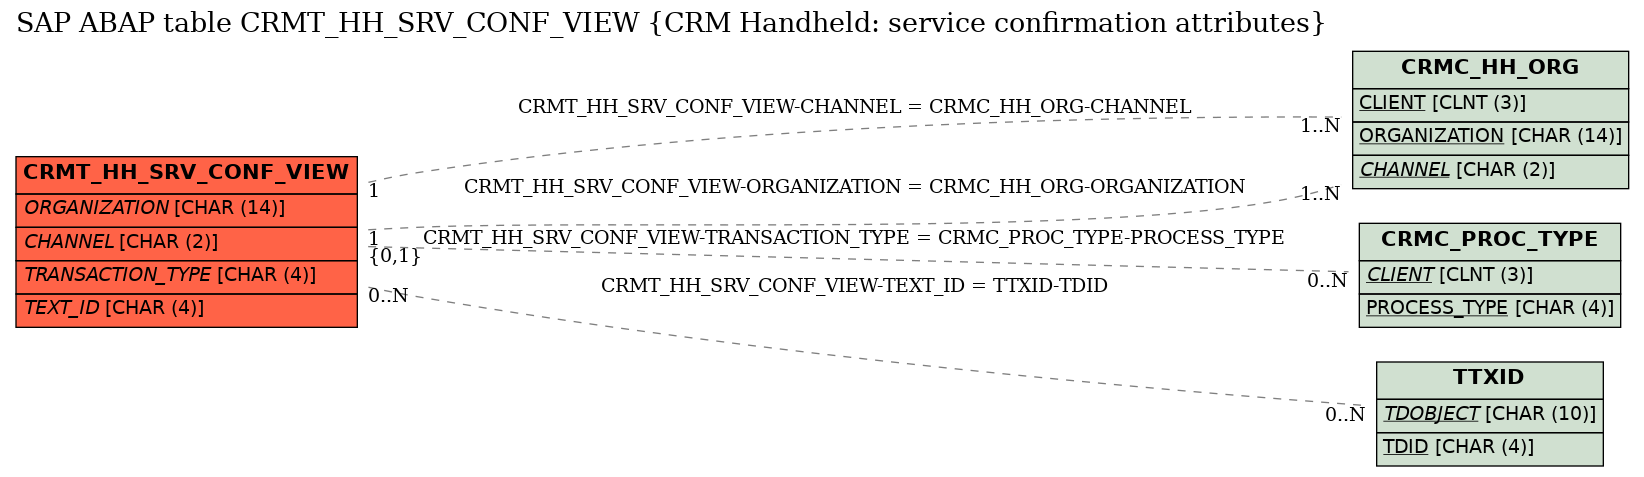 E-R Diagram for table CRMT_HH_SRV_CONF_VIEW (CRM Handheld: service confirmation attributes)